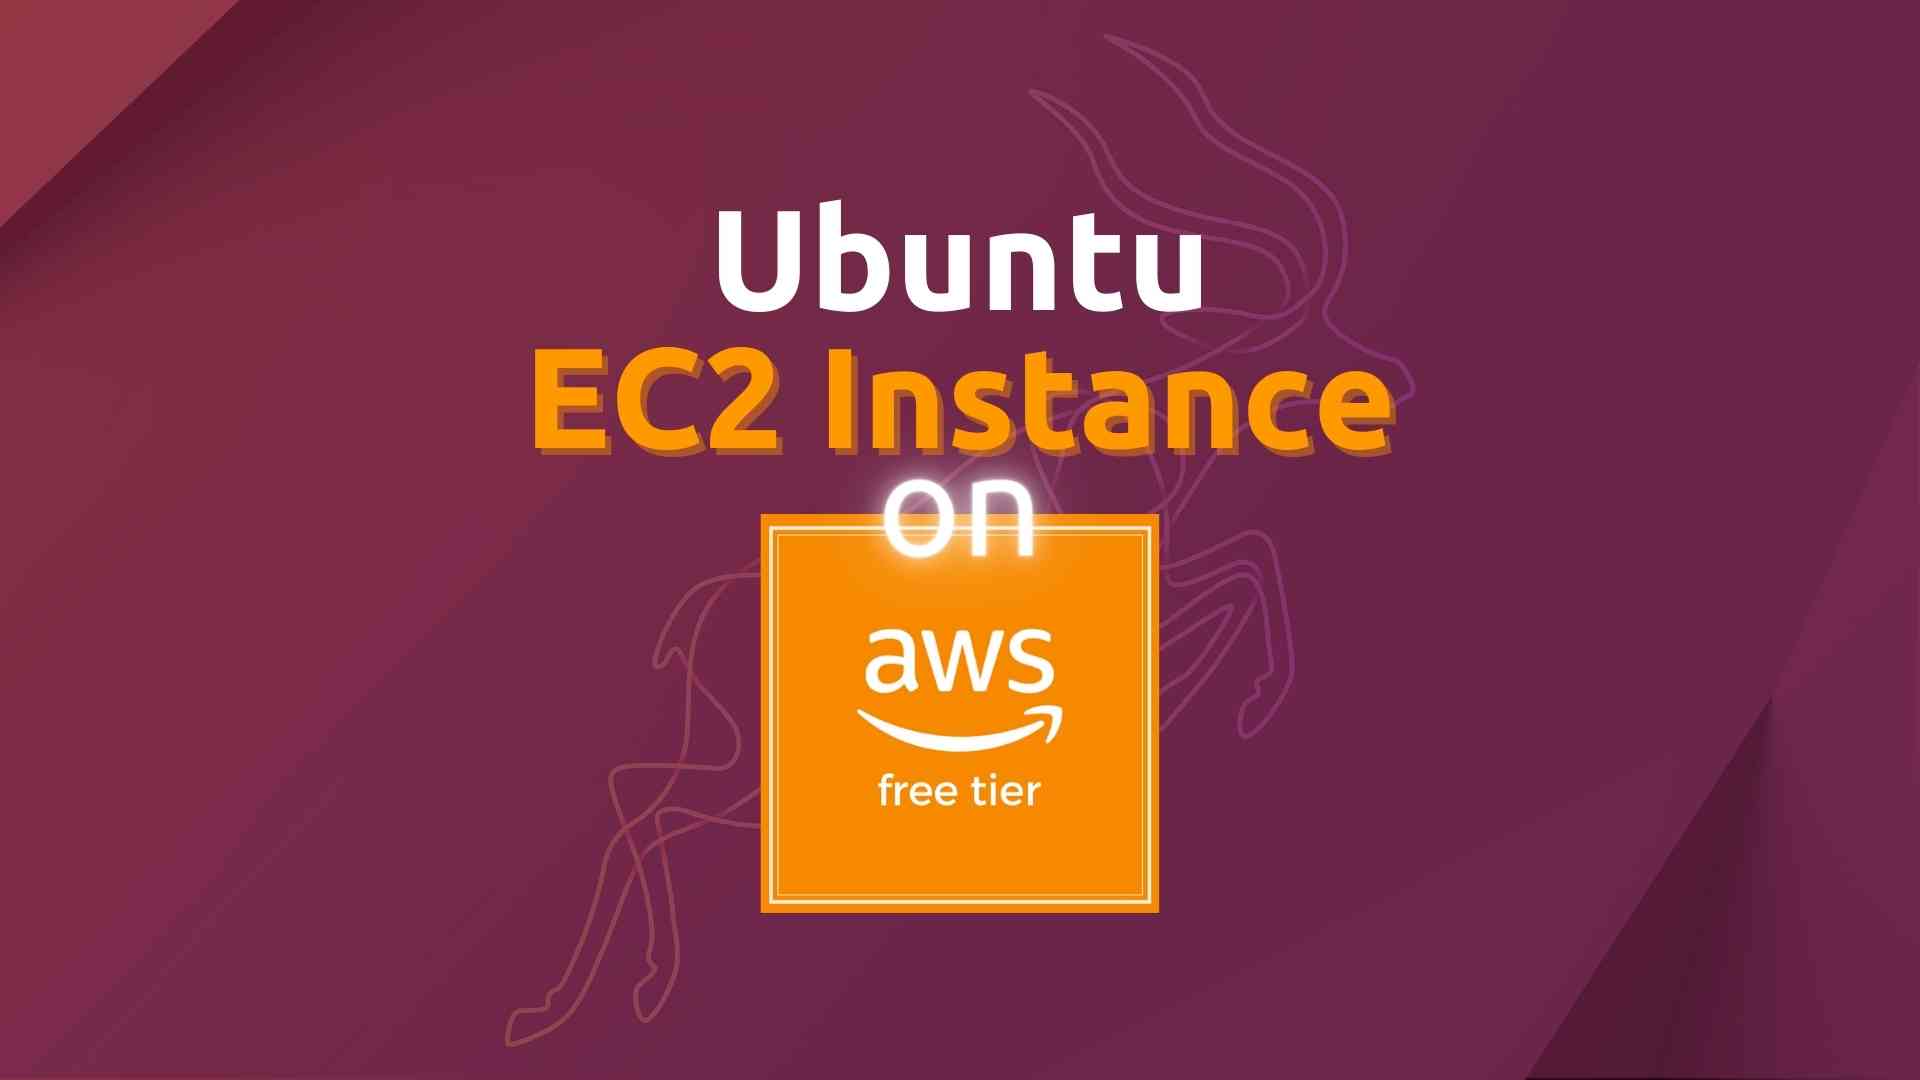 Step by step guide to create Ubuntu Server EC2 instance on AWS